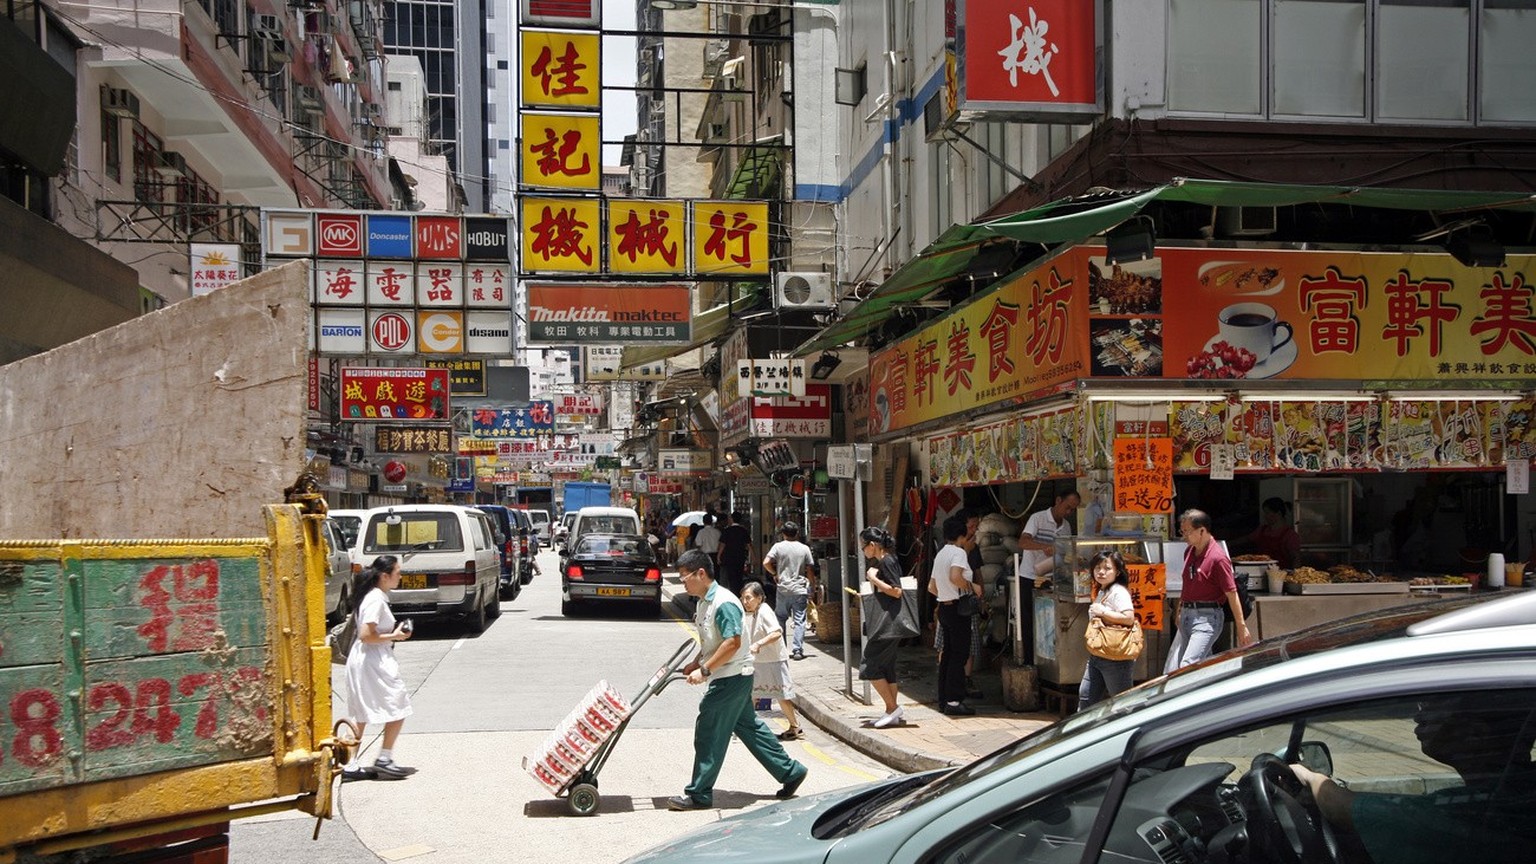 Street life is busy in downtown Hong Kong, China, Saturday July 7, 2007. Hong Kong, officially the Hong Kong Special Administrative Region, is one of the two special administrative regions of the Peop ...